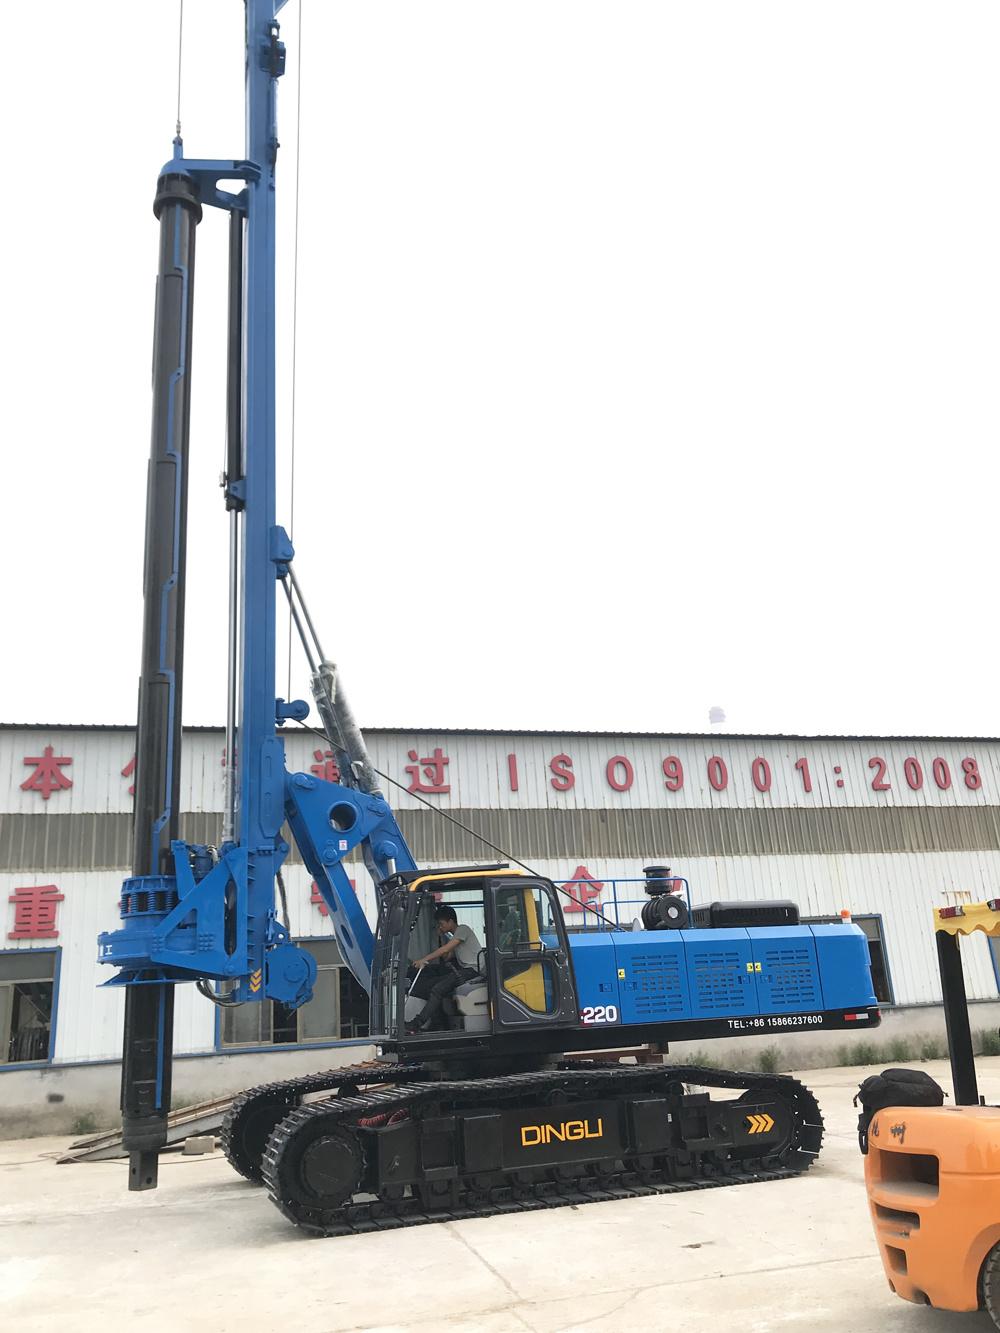 Water Well Drilling Rigs Manufacturer Drilling Rig for Engineering Project/Diaphragm Wall Construction/Piling Foundation Project Dr-220